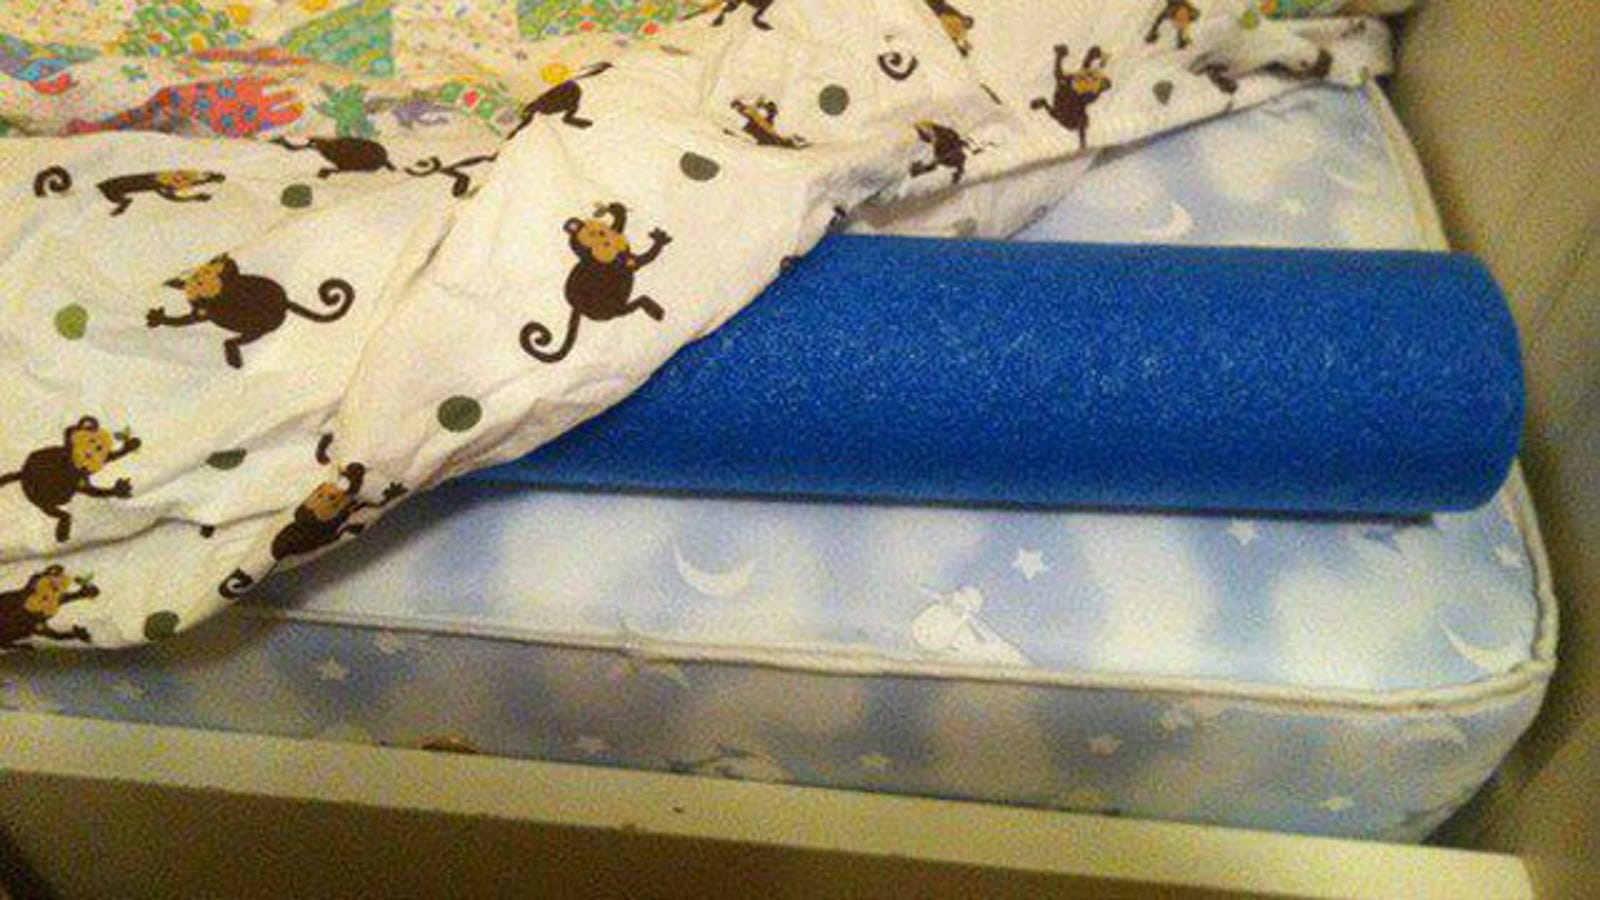 Keep Kids from Falling out of Bed with Pool Noodles